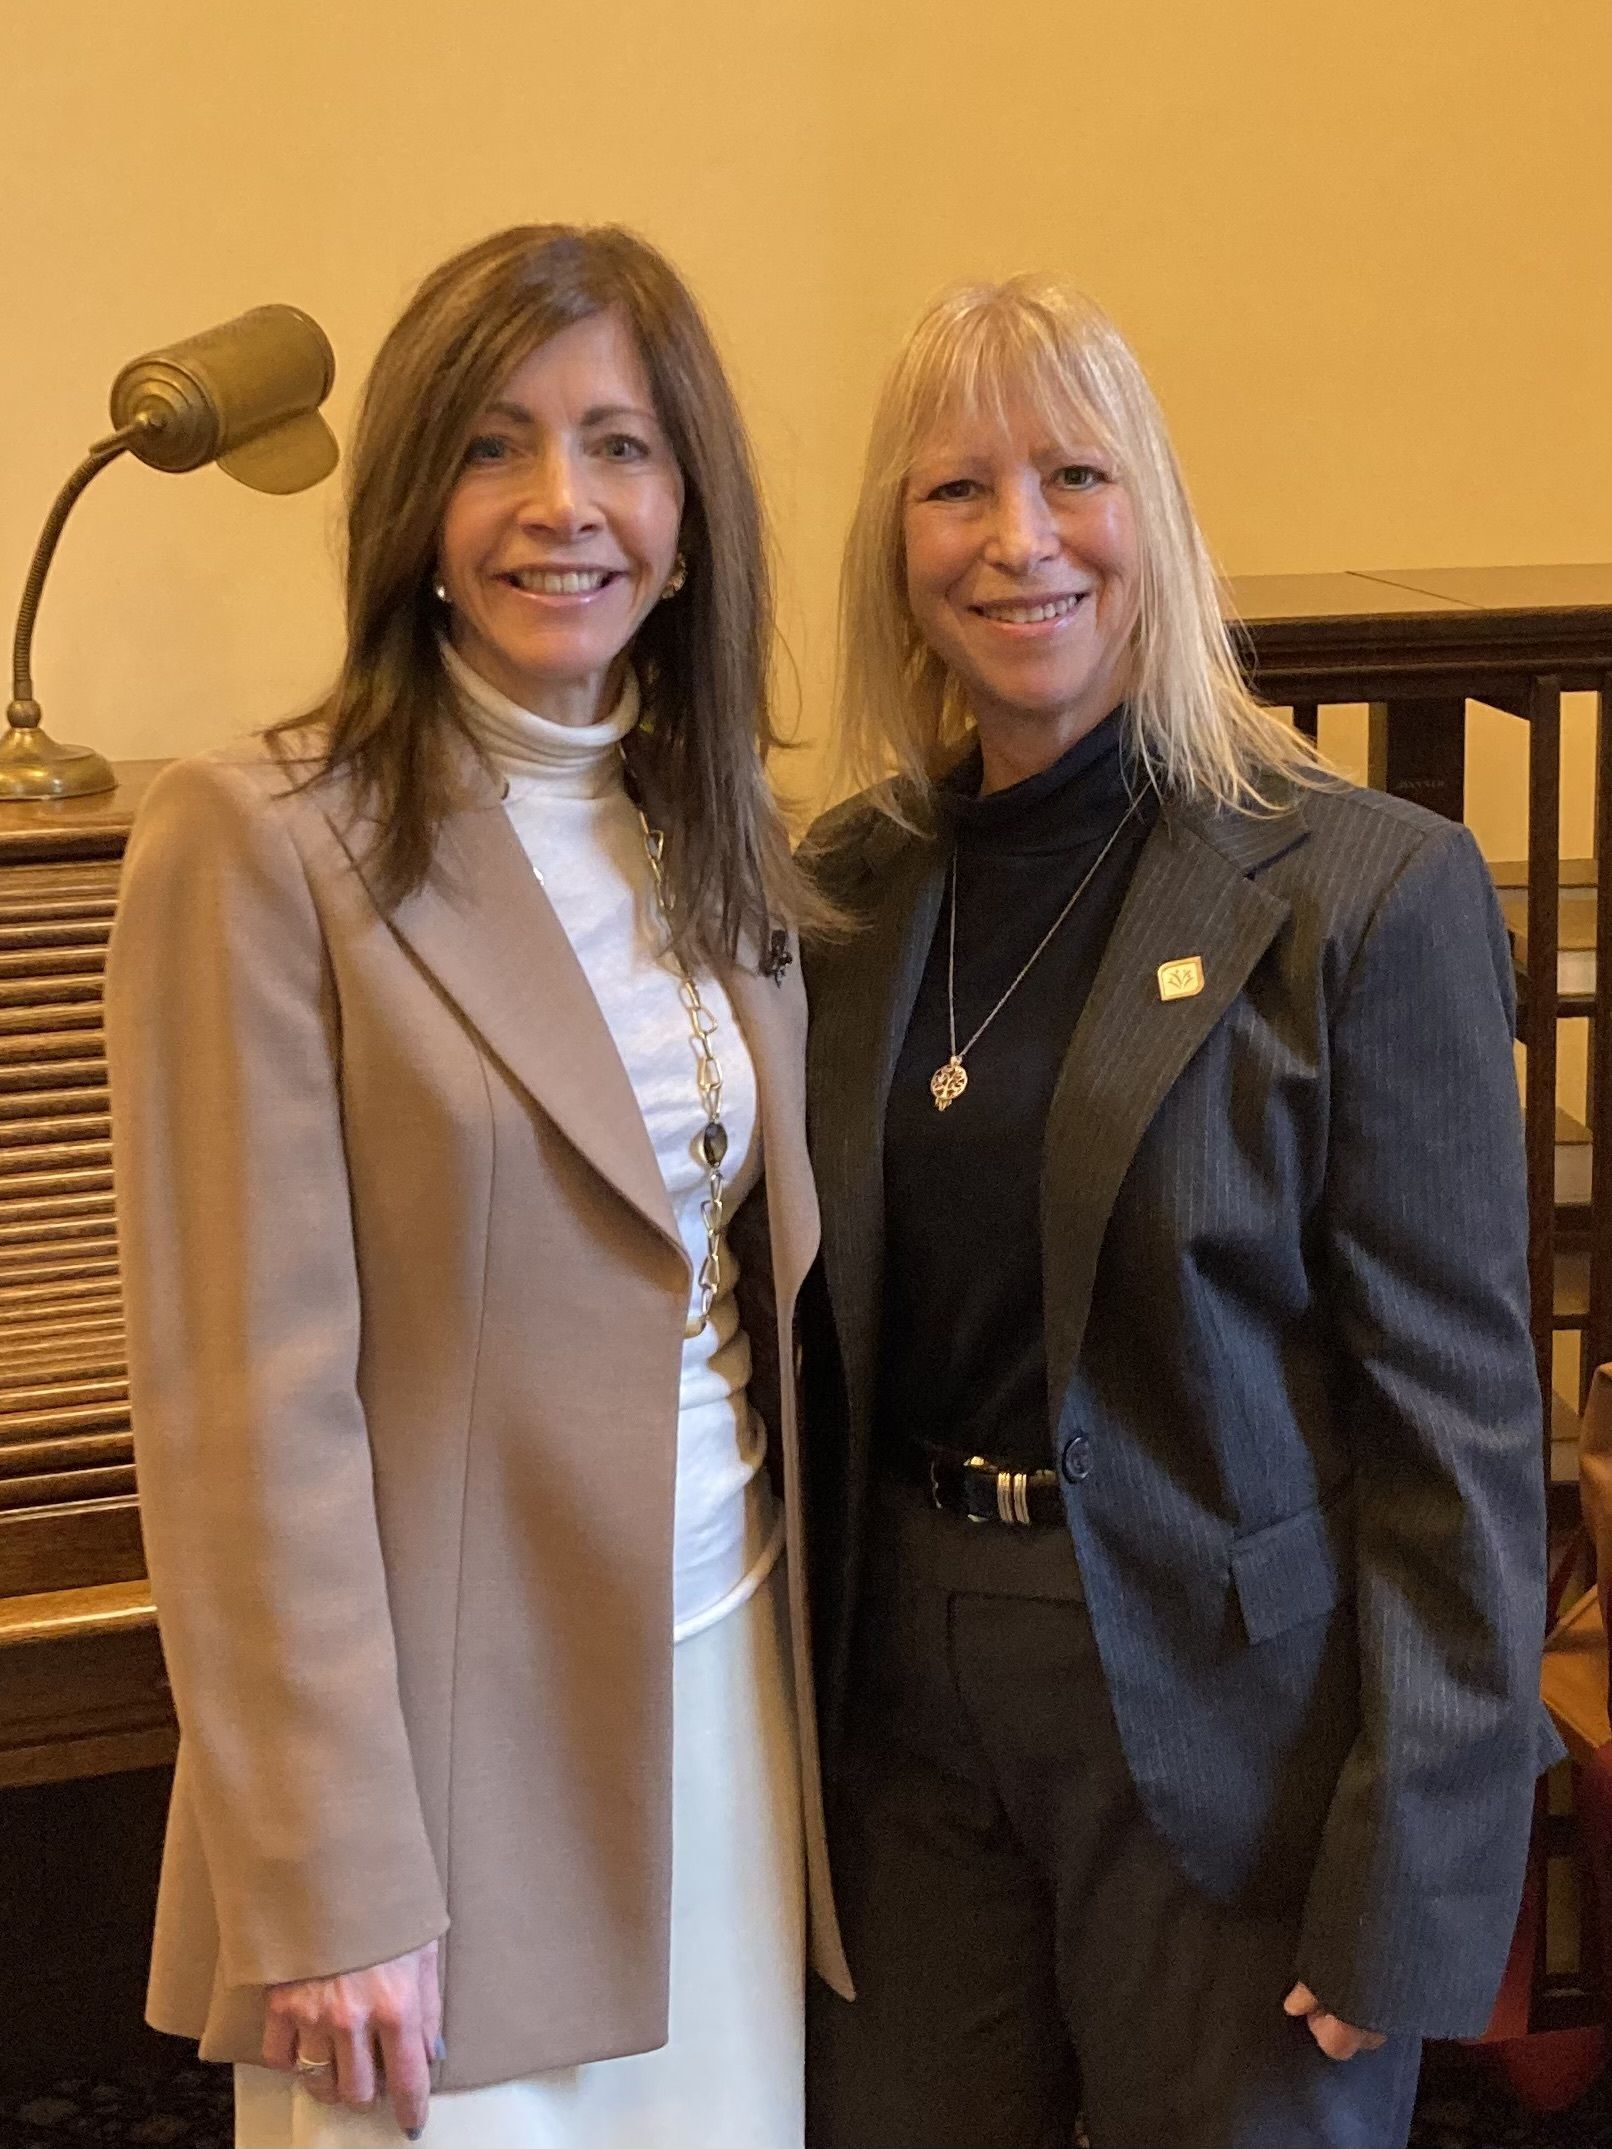 CJFHC Family Connects Program Staff Member, Beth Hanks, Attends Governor's Budget Address